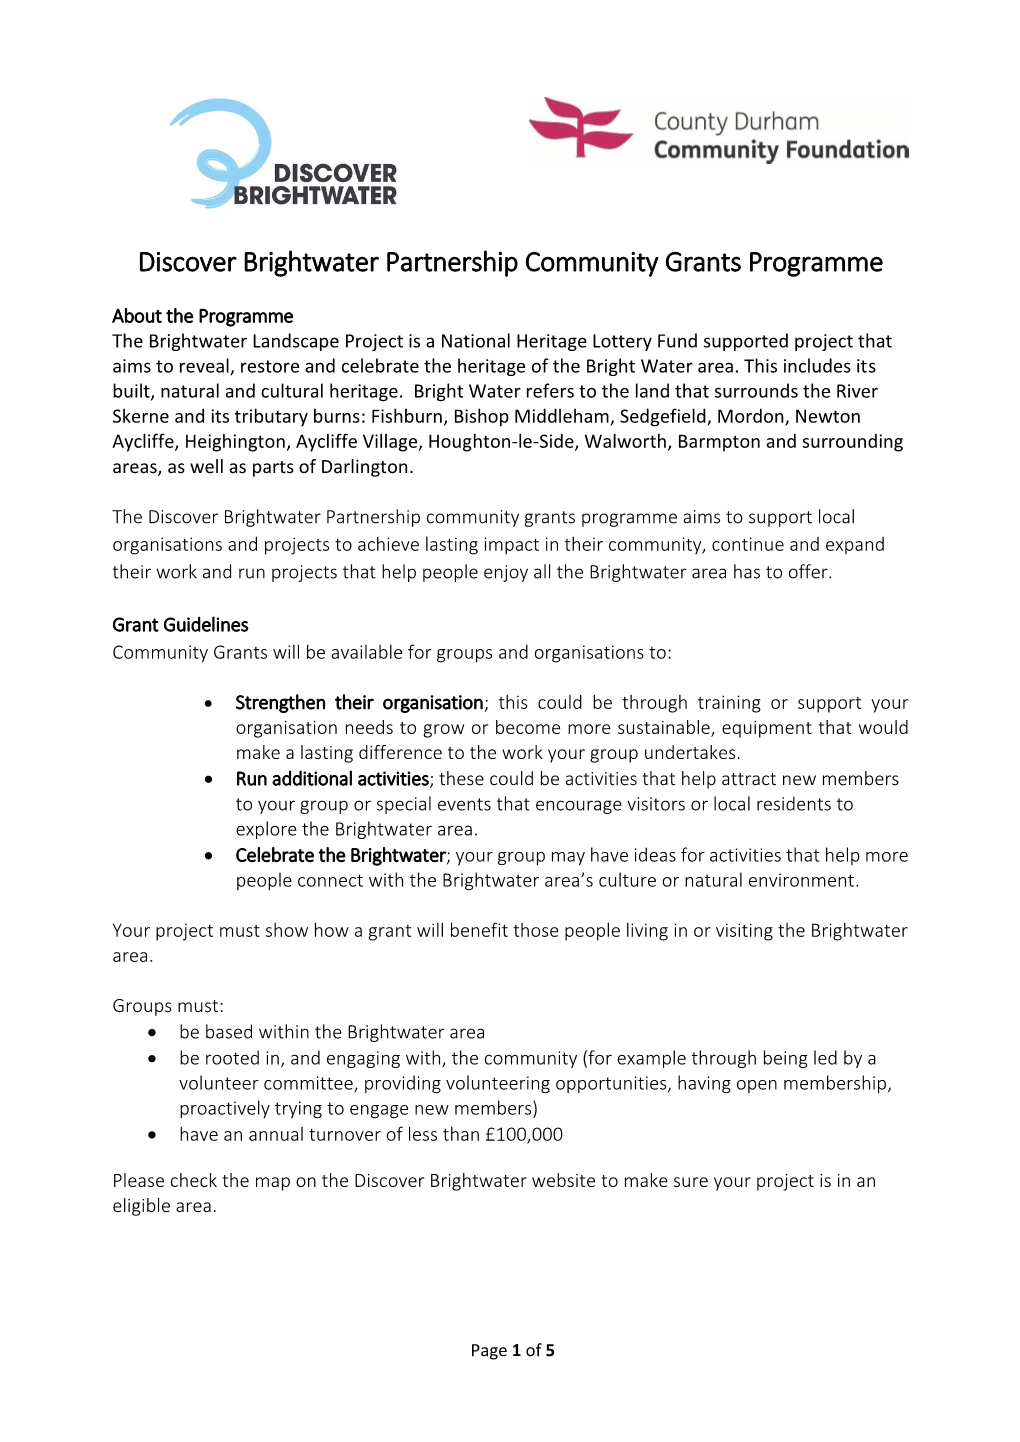 Grant Guidelines Community Grants Will Be Available for Groups and Organisations To